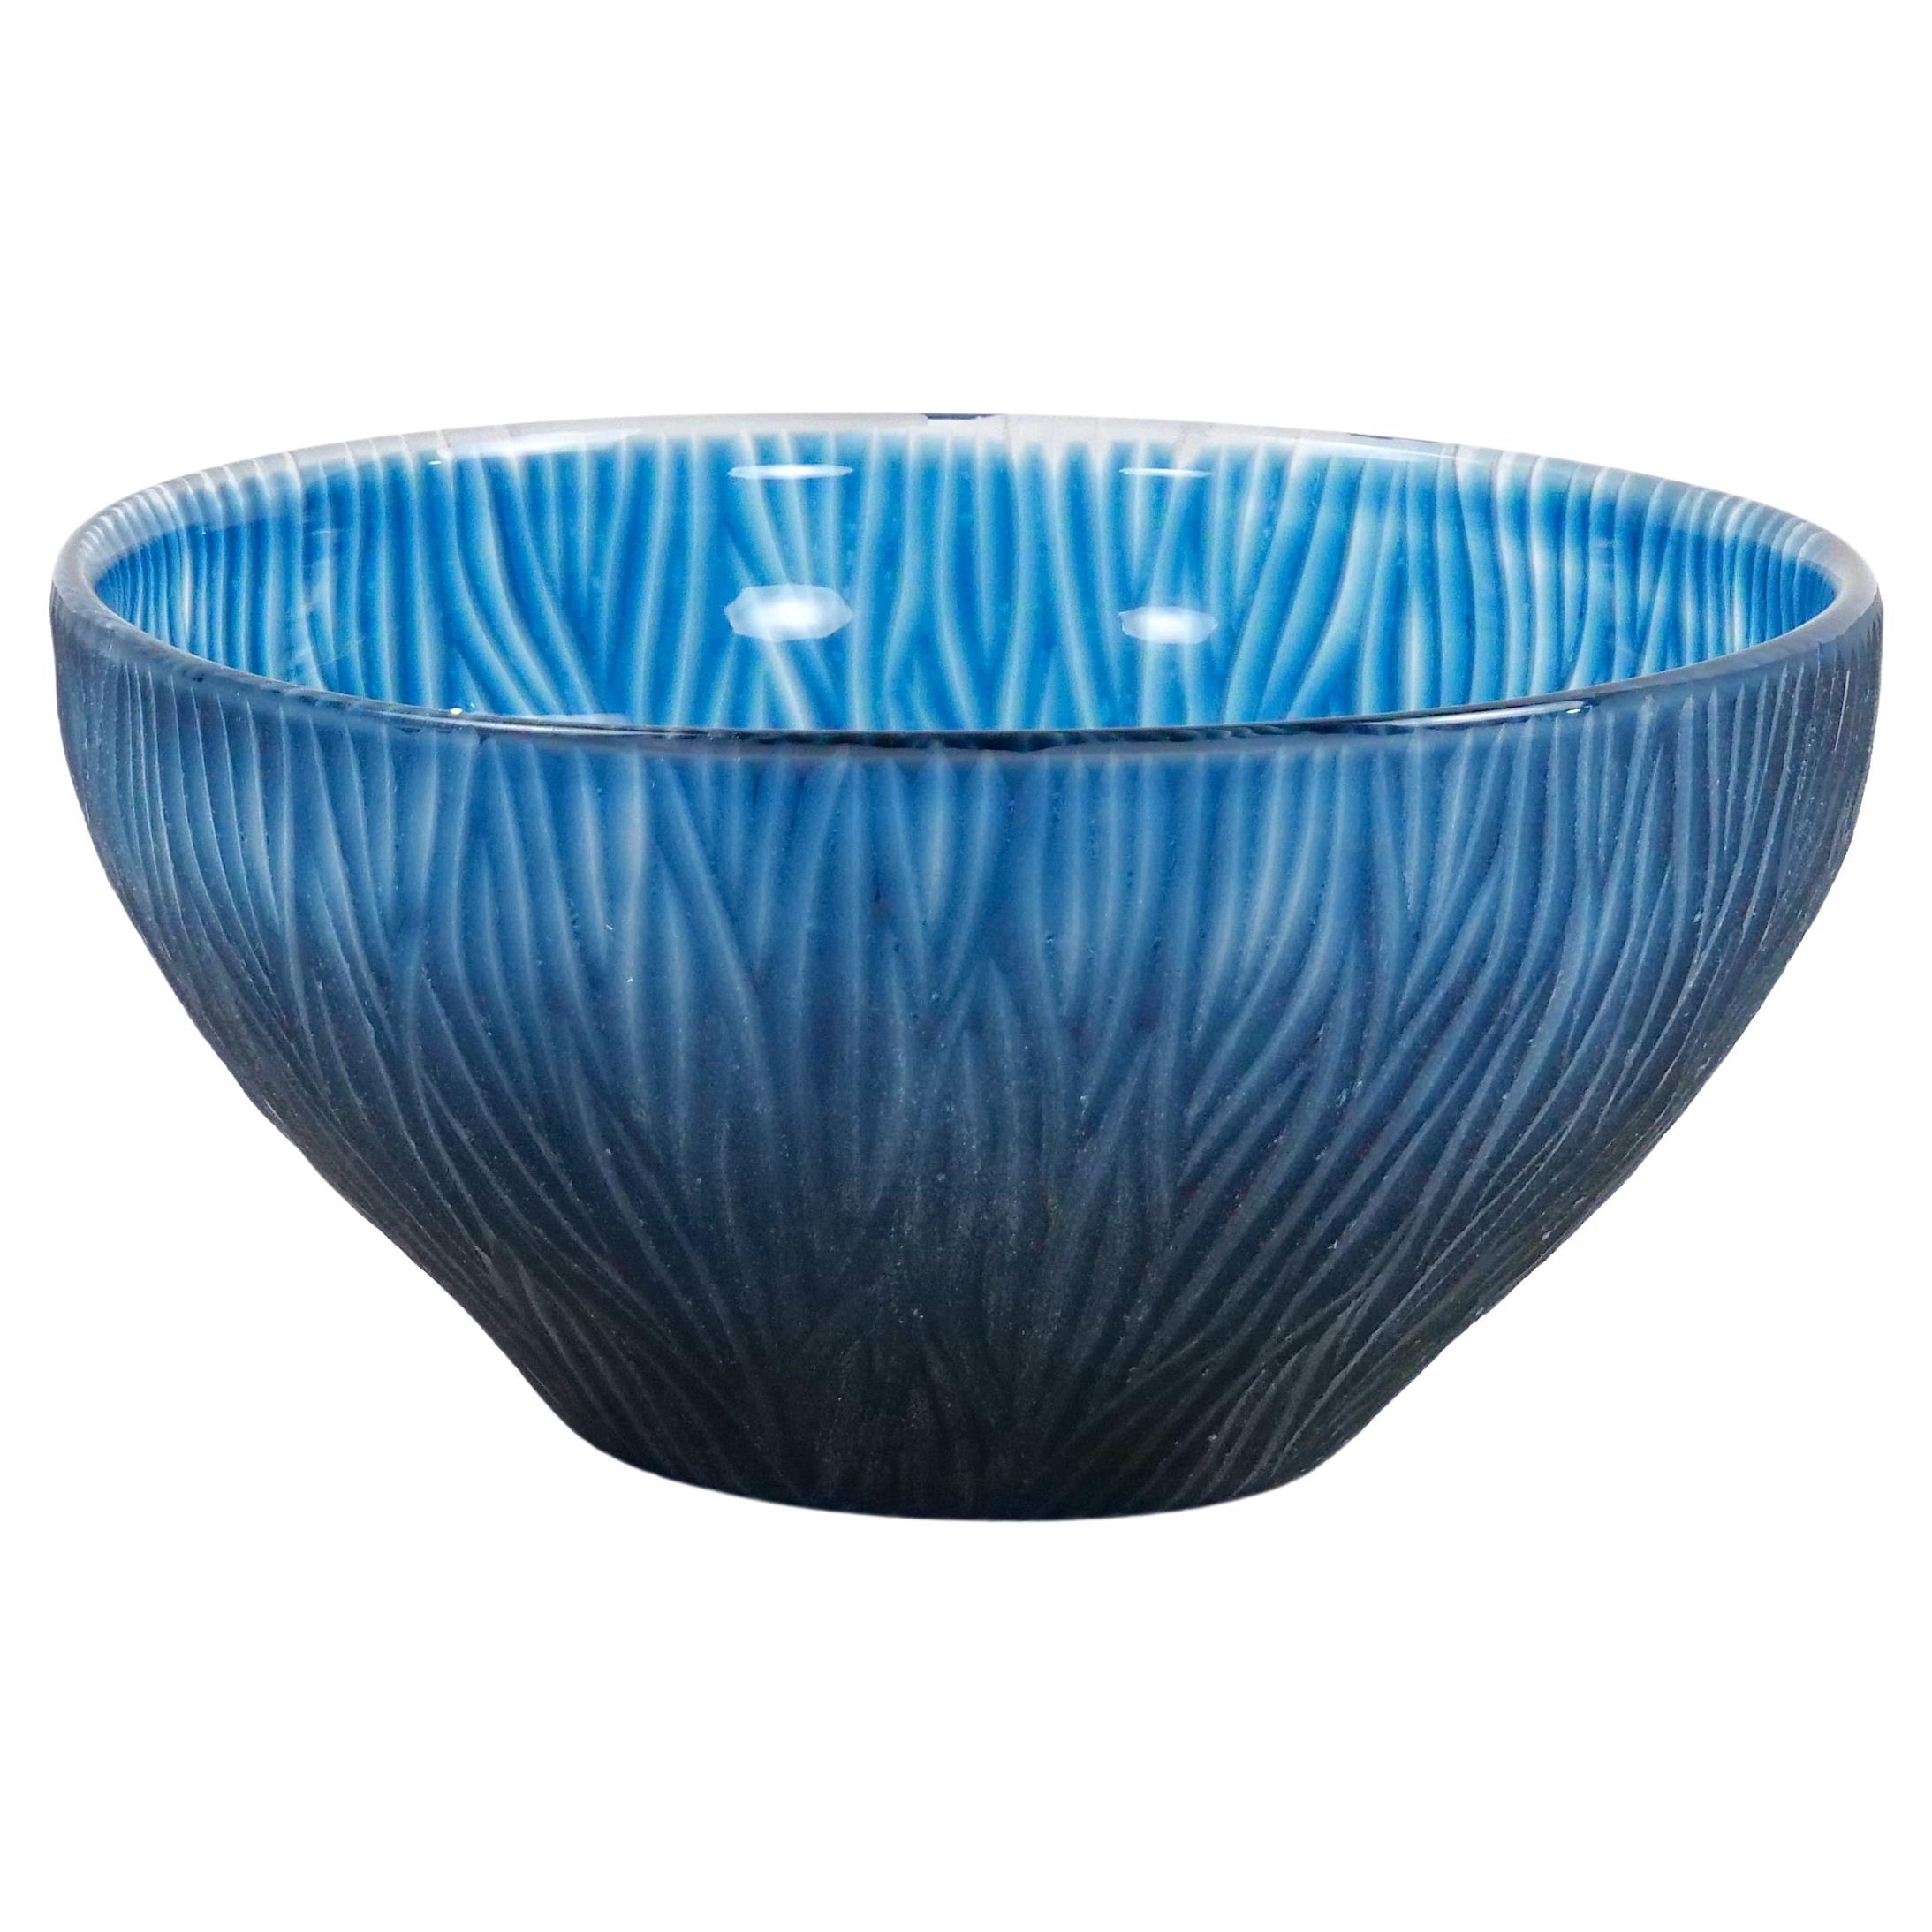  20th Century Blue Glass Centerpiece Bowl by Giampaolo Murano Italy For Sale